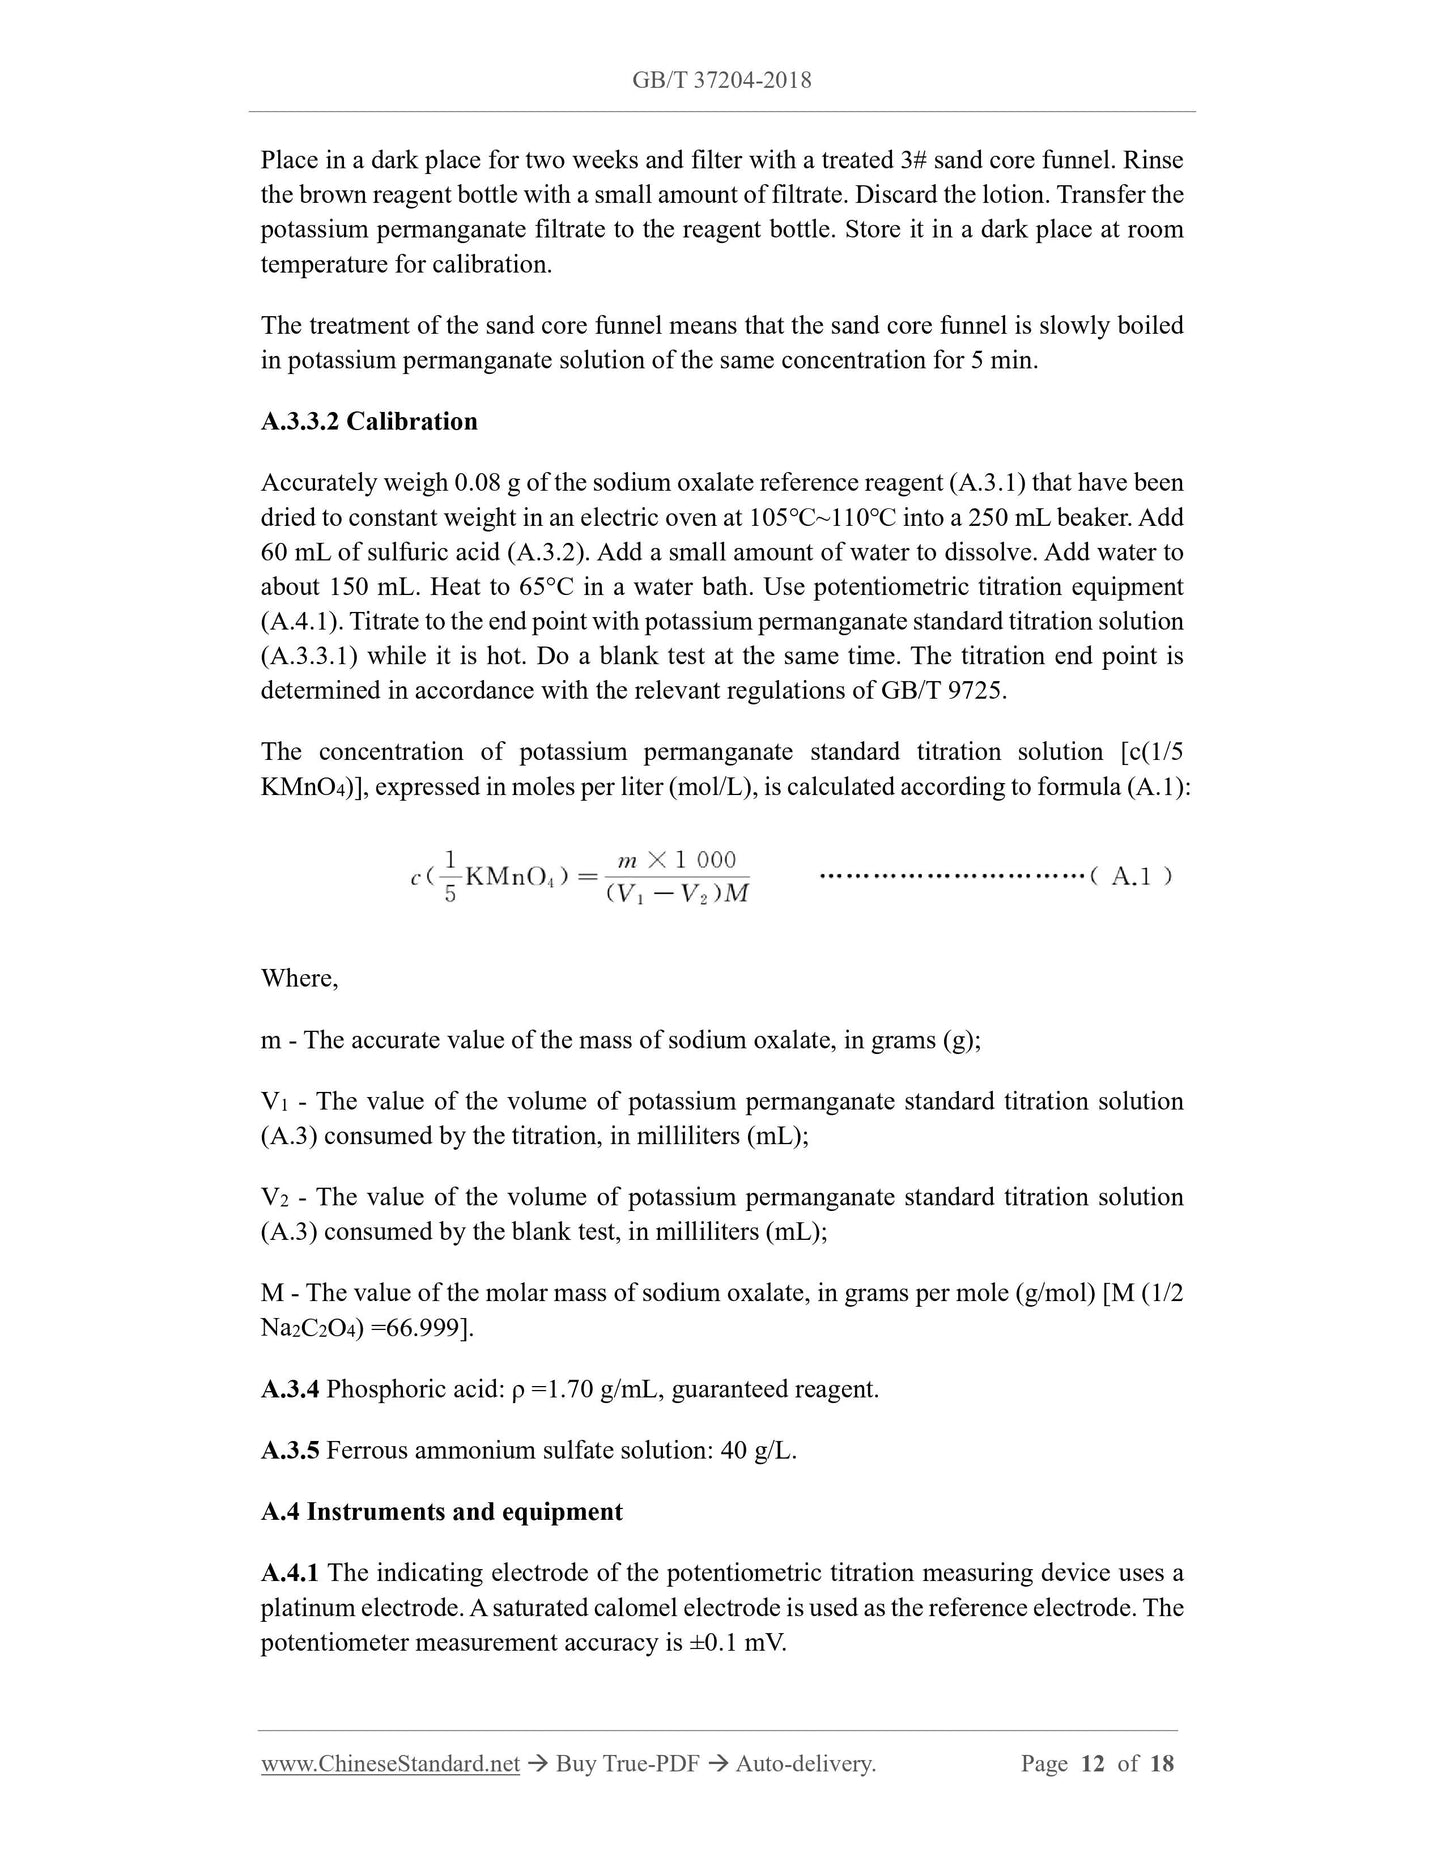 GB/T 37204-2018 Page 7